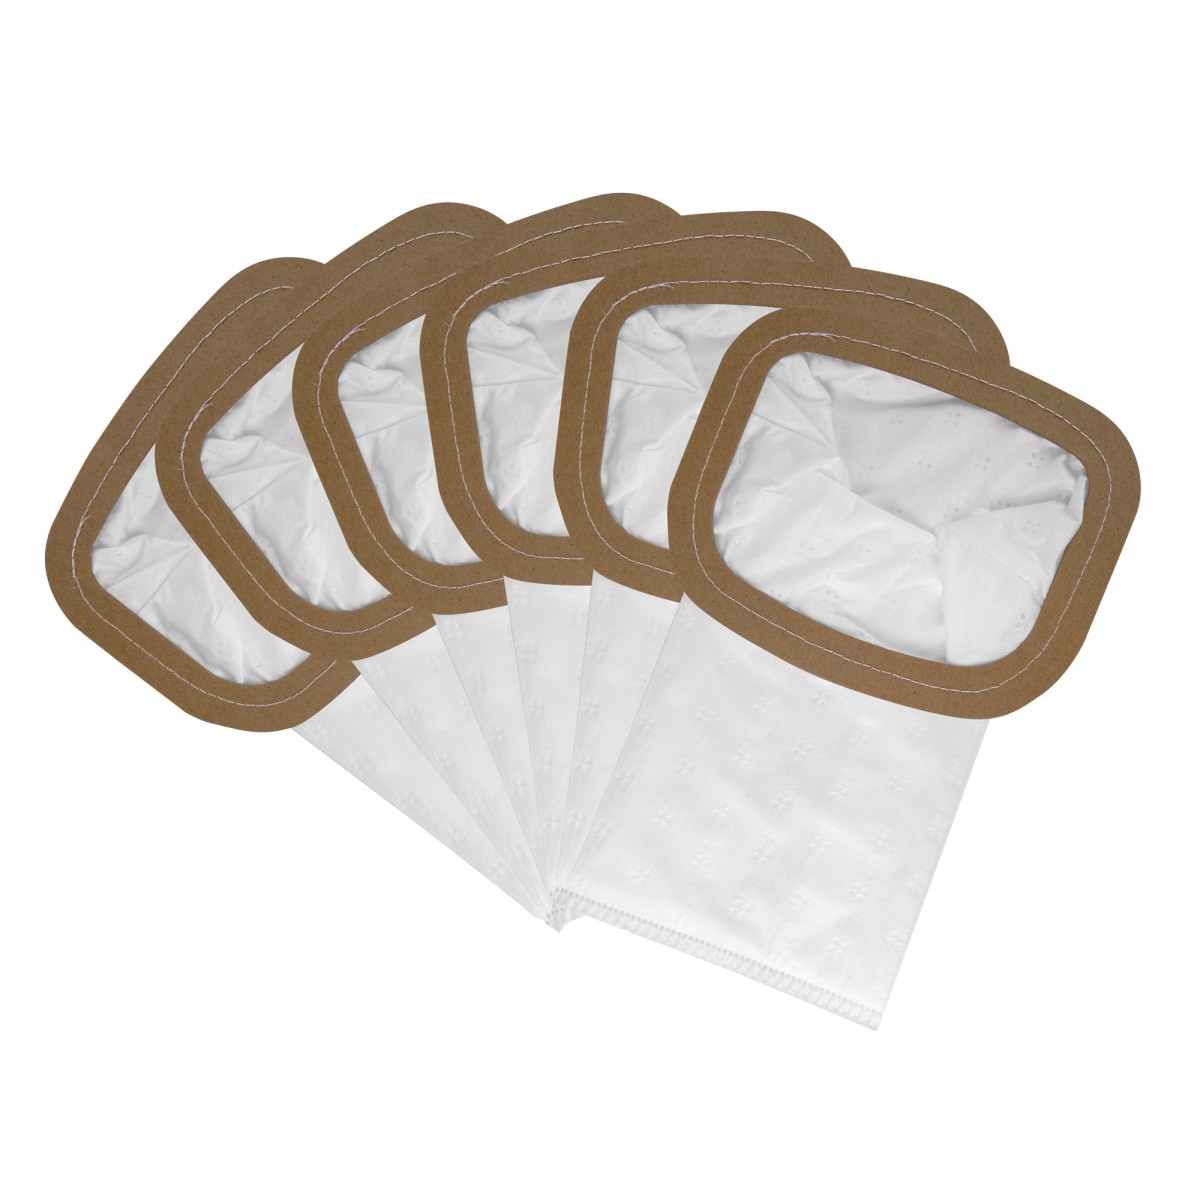 HEPA MICRO FILTER BAGS FOR THE JVBP6 BACKPACK VACUUM CLEANER FROM JOHNNY VAC